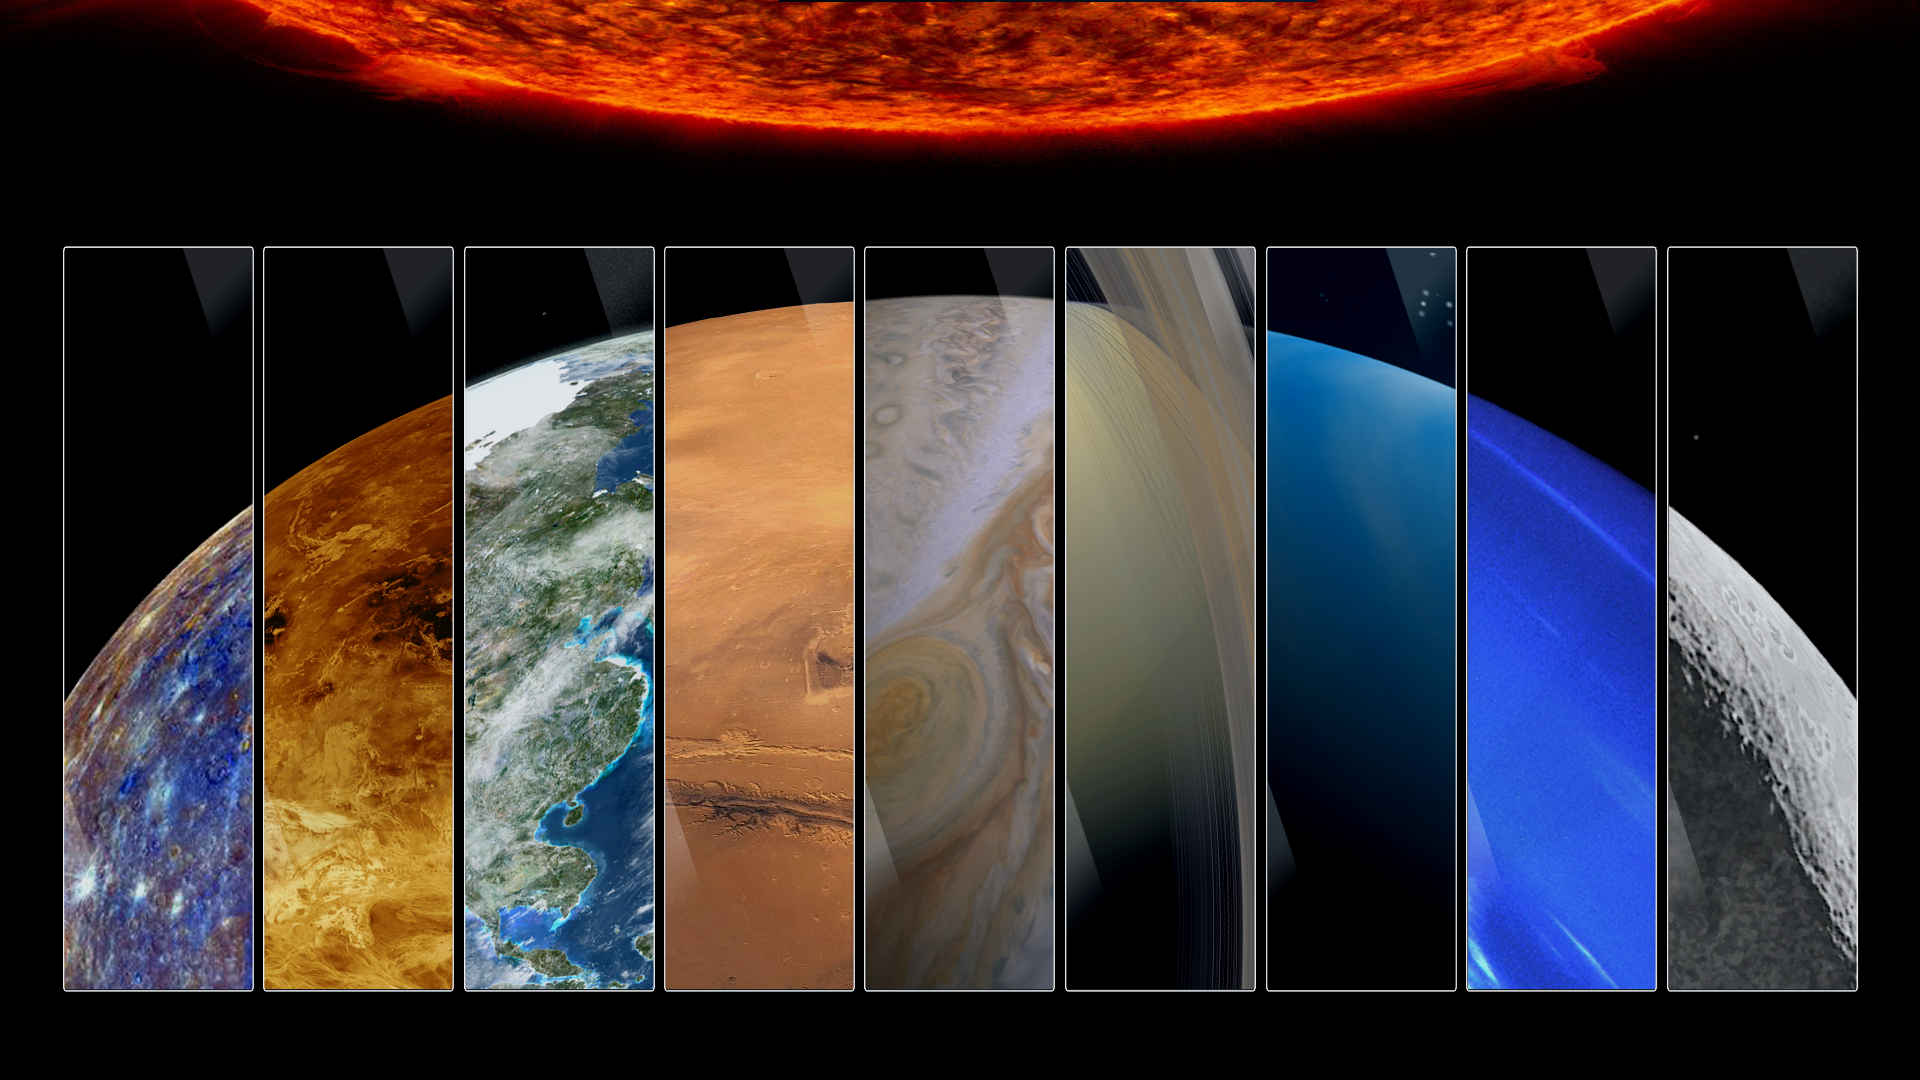 Our Solar System Wallpaper - Pics about space